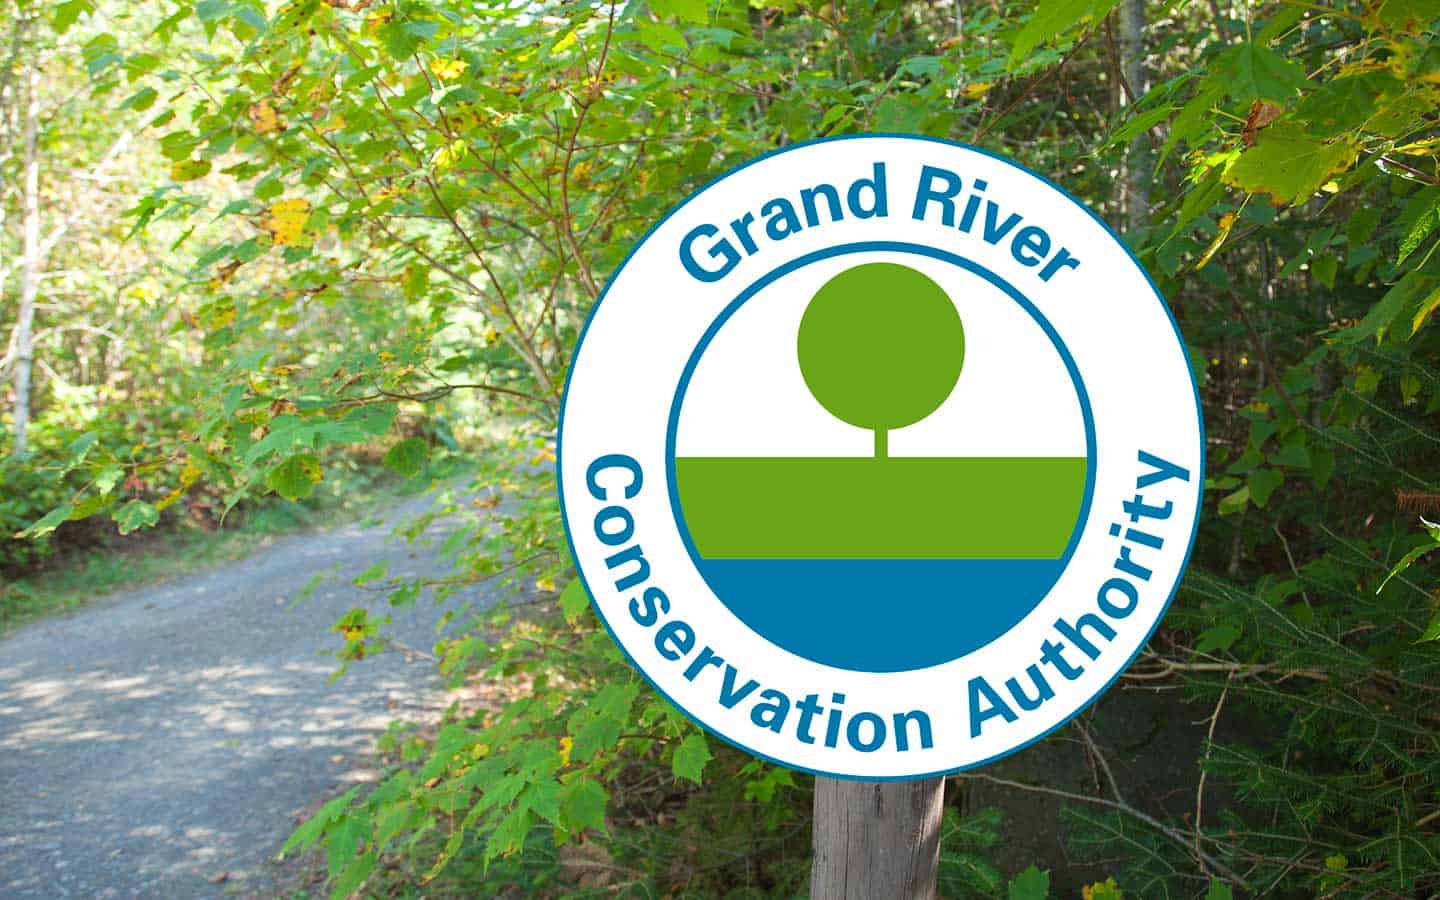                      GRCA, local supporters push back at plans to weaken conservation organizations                             
                     